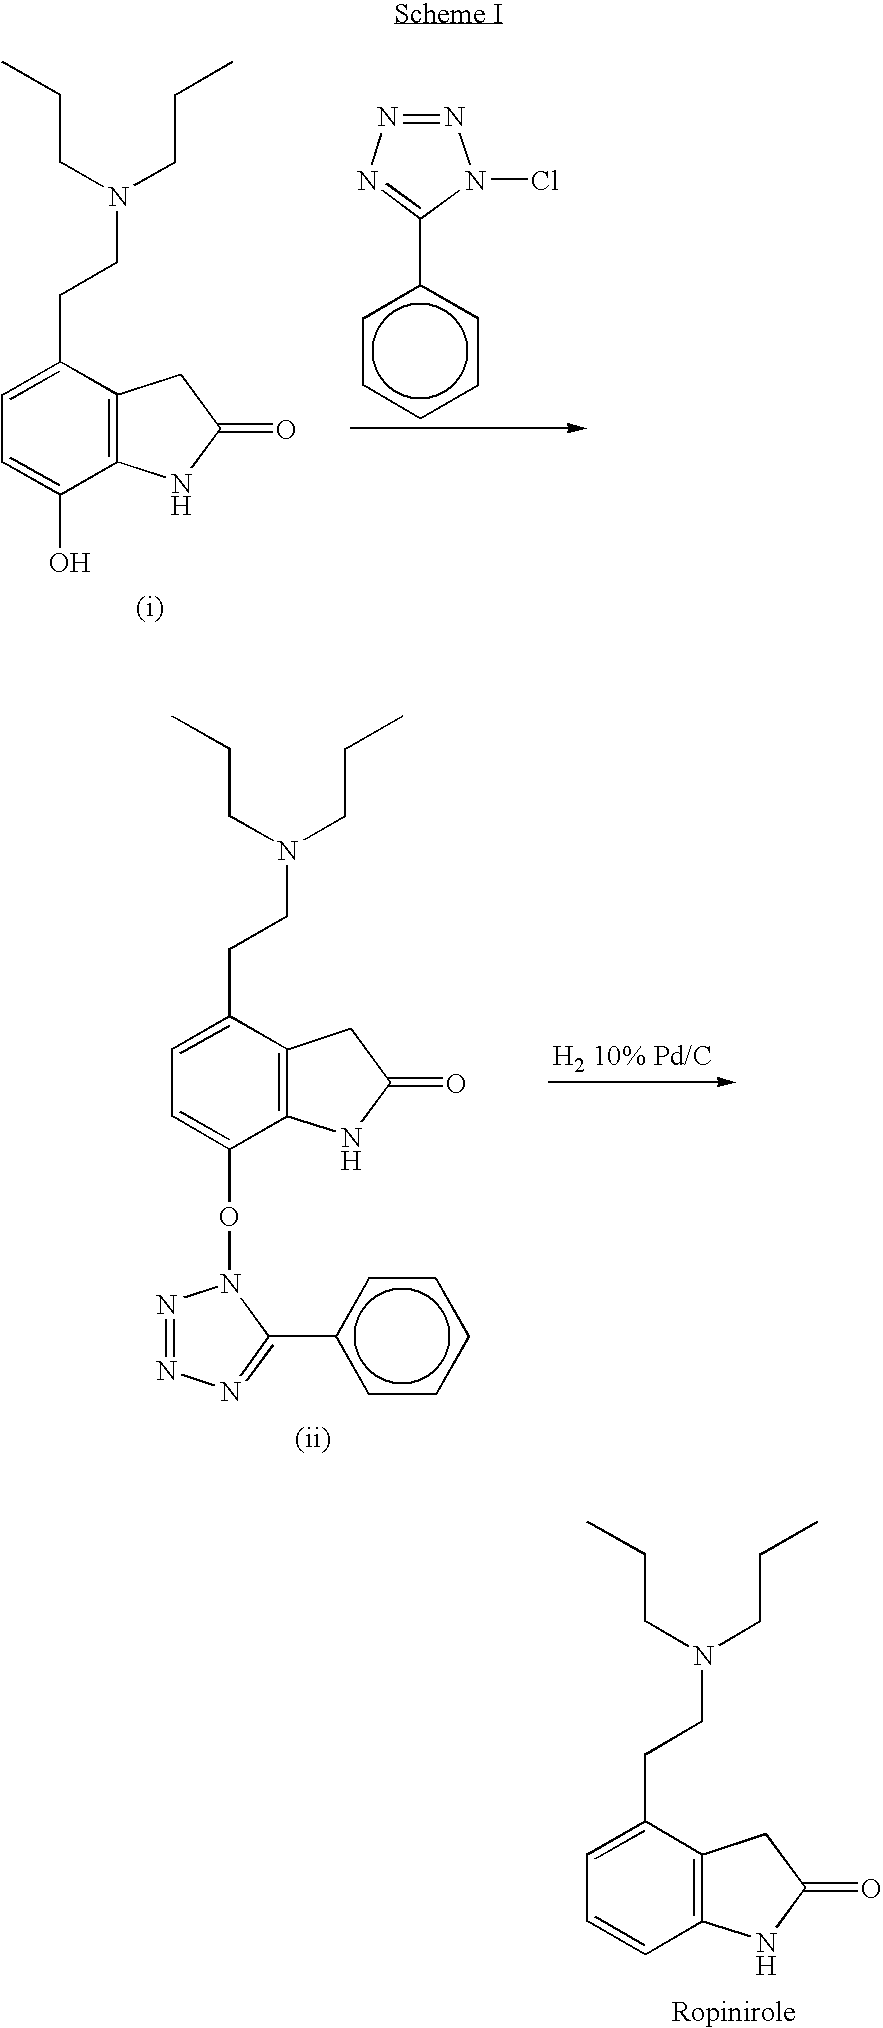 Process for the preparation of 4-(2-dipropylaminoethyl)-1,3-dihydro-2H-indol-2-one hydrochloride